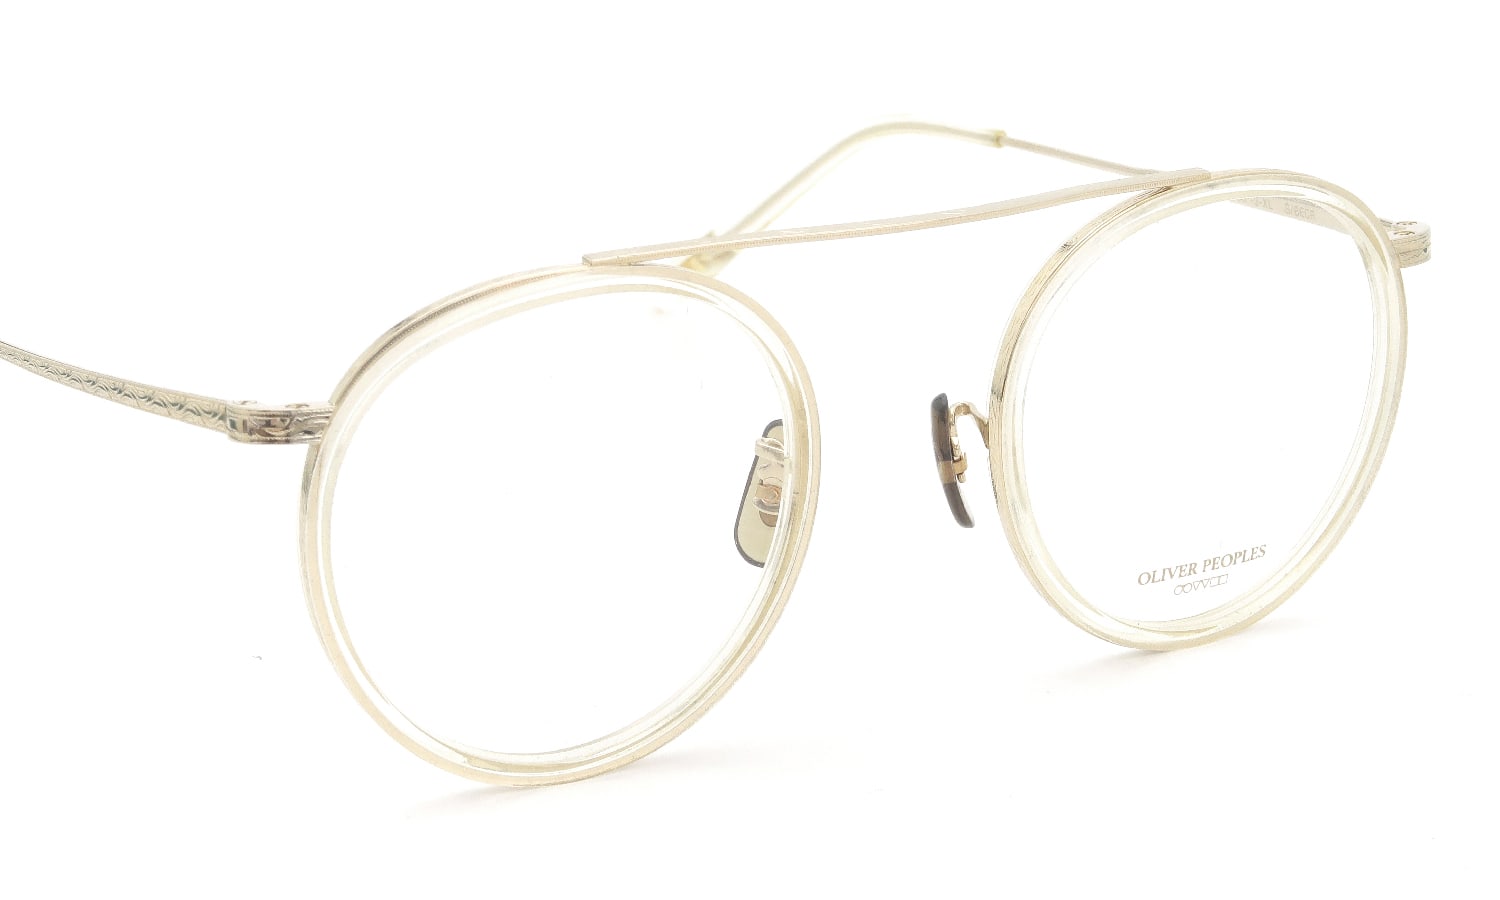 OLIVER PEOPLES archive メガネ通販 MP-3-XL G/BECR (生産：オプテックジャパン期) ポンメガネ